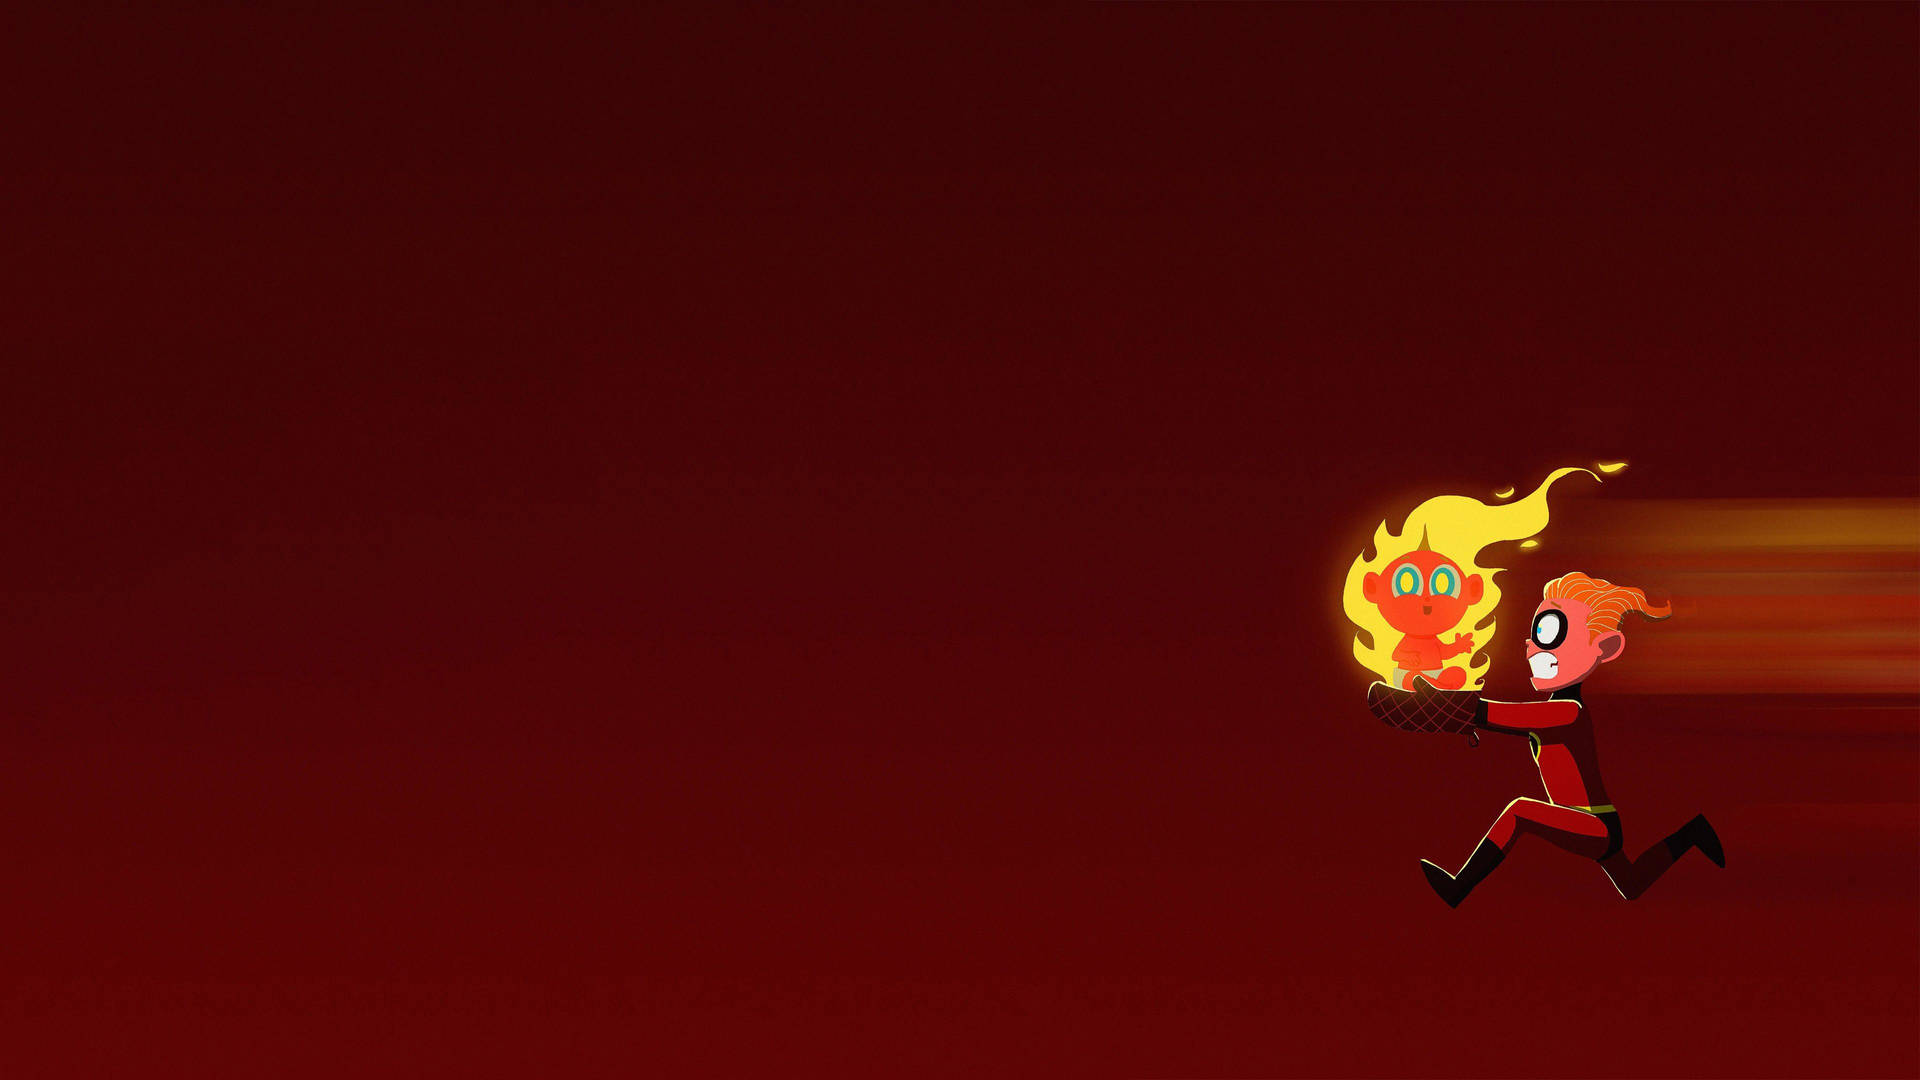 The Incredibles Dash And Jack-jack Background